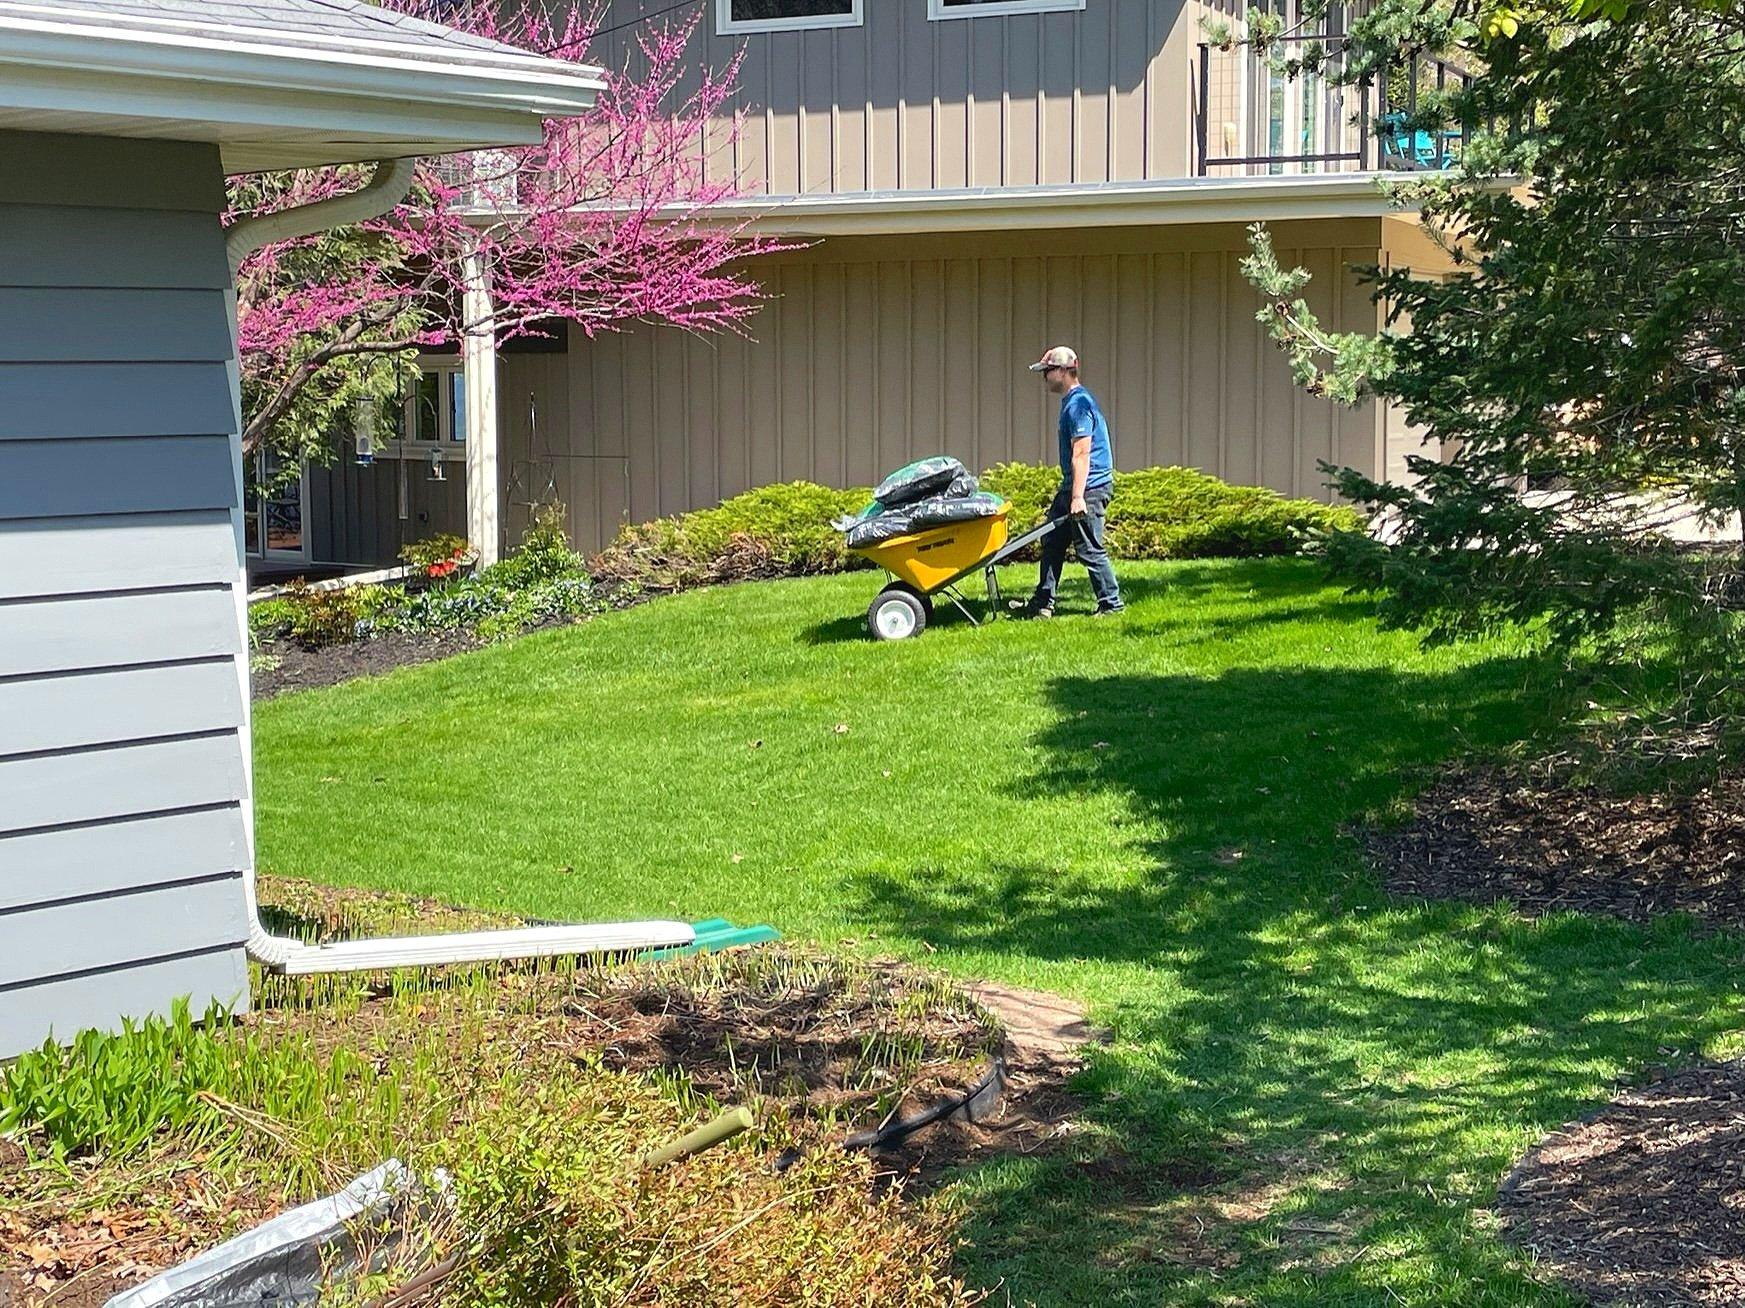 Lawn care professionals expertly mowing and maintaining a lush green lawn.